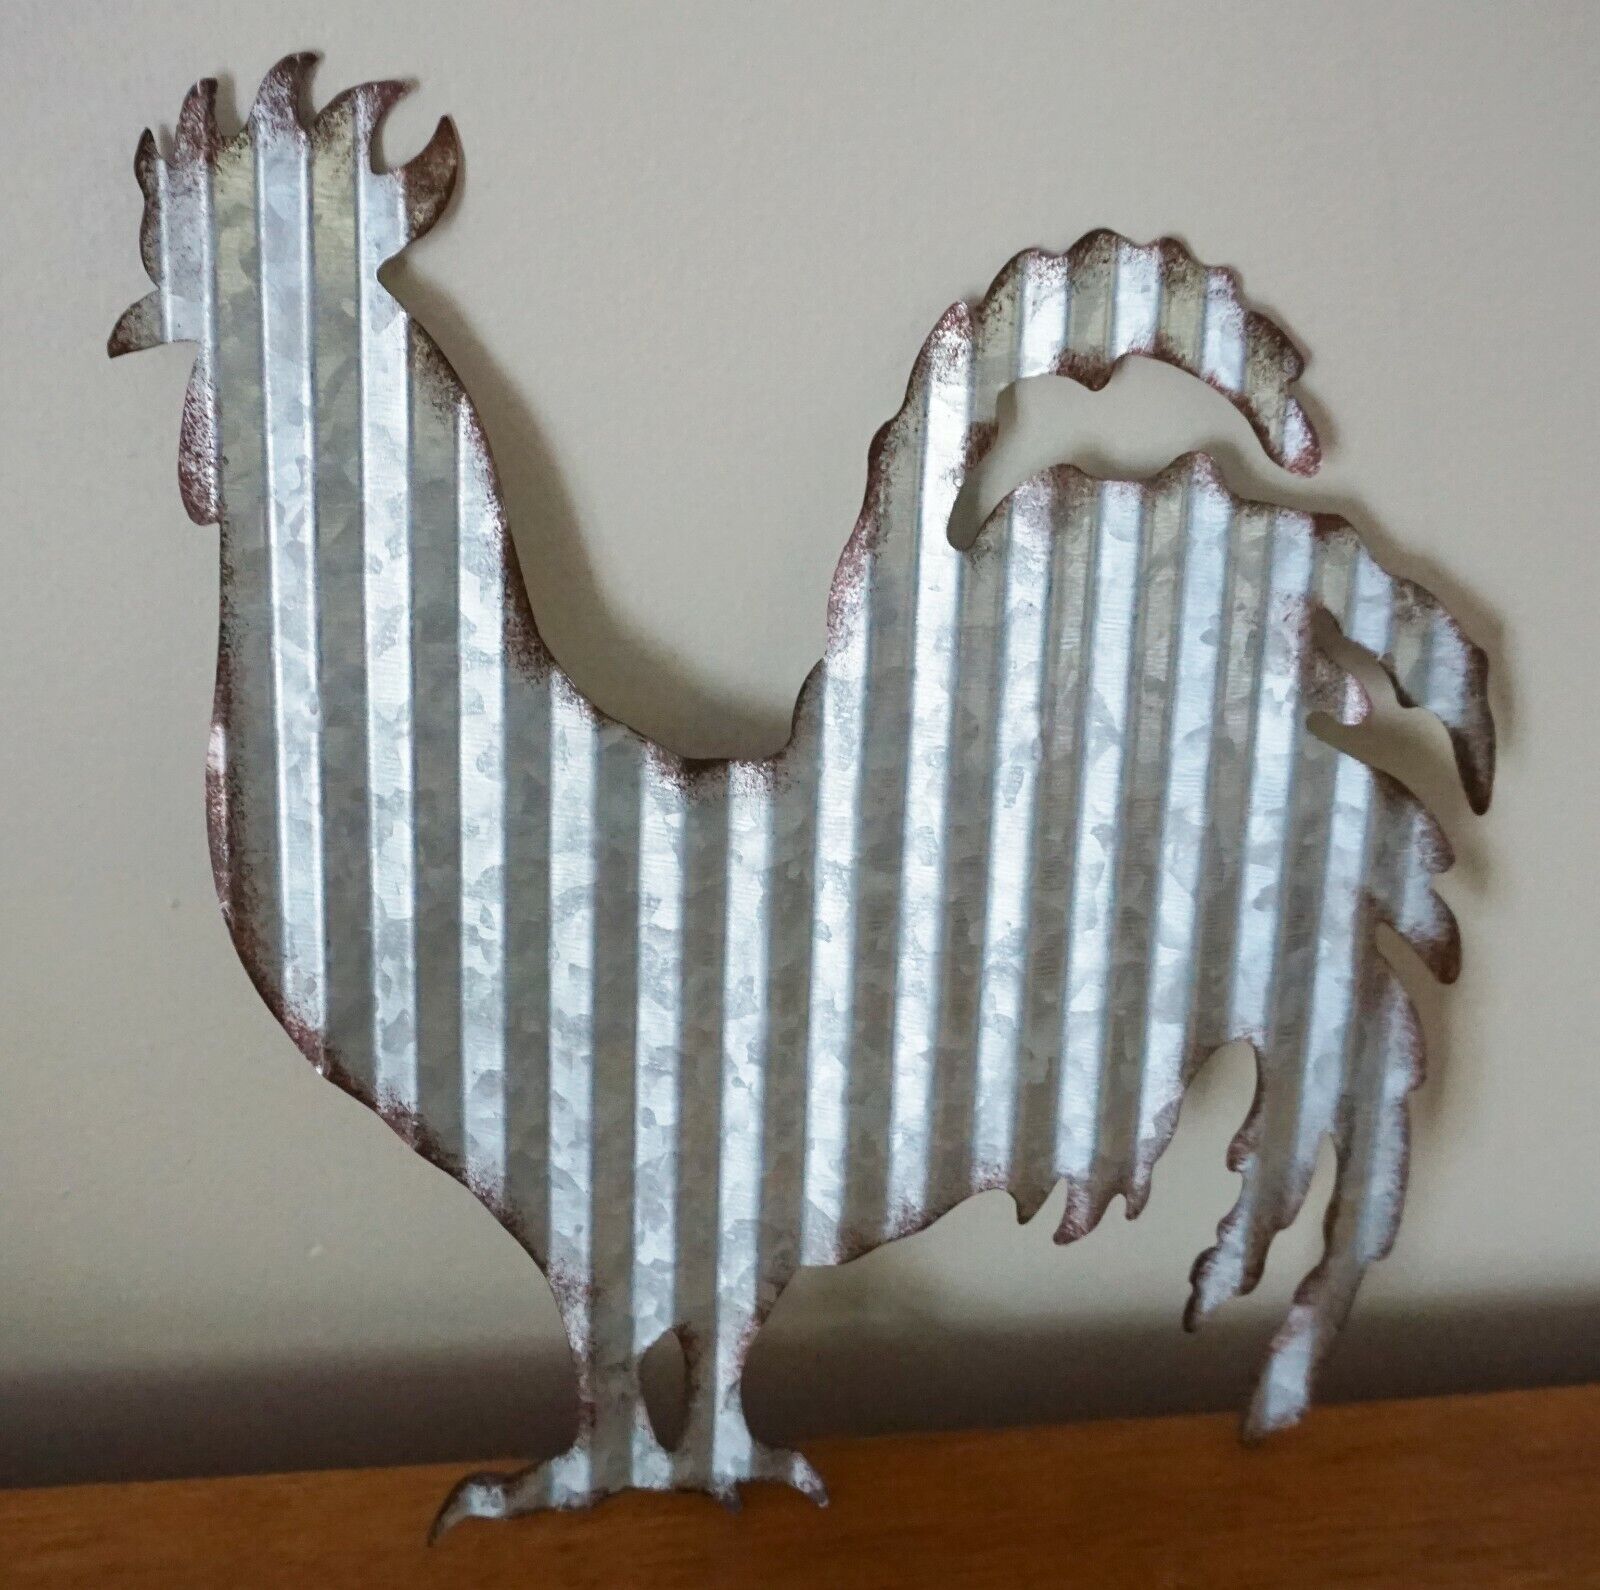 ROOSTER CHICKEN METAL SCULPTURE SIGN Rustic Country Primitive Kitchen Home Decor